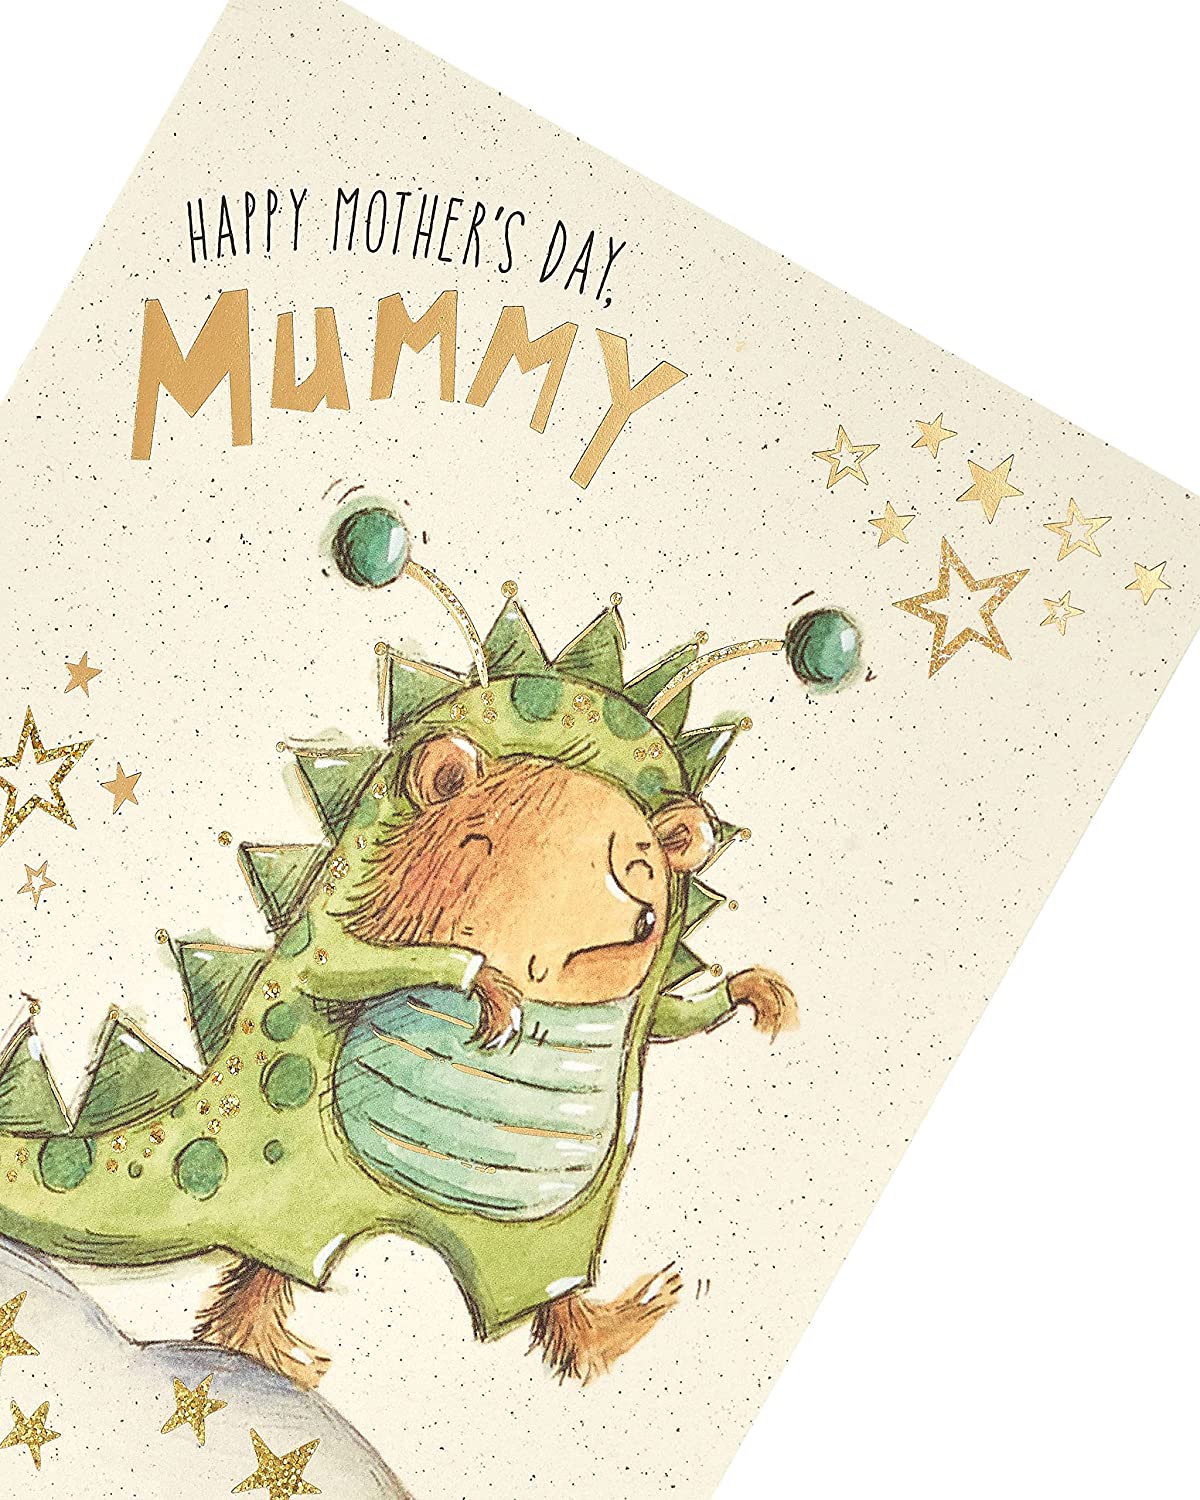 Cute Monster Design Mother's Day Card